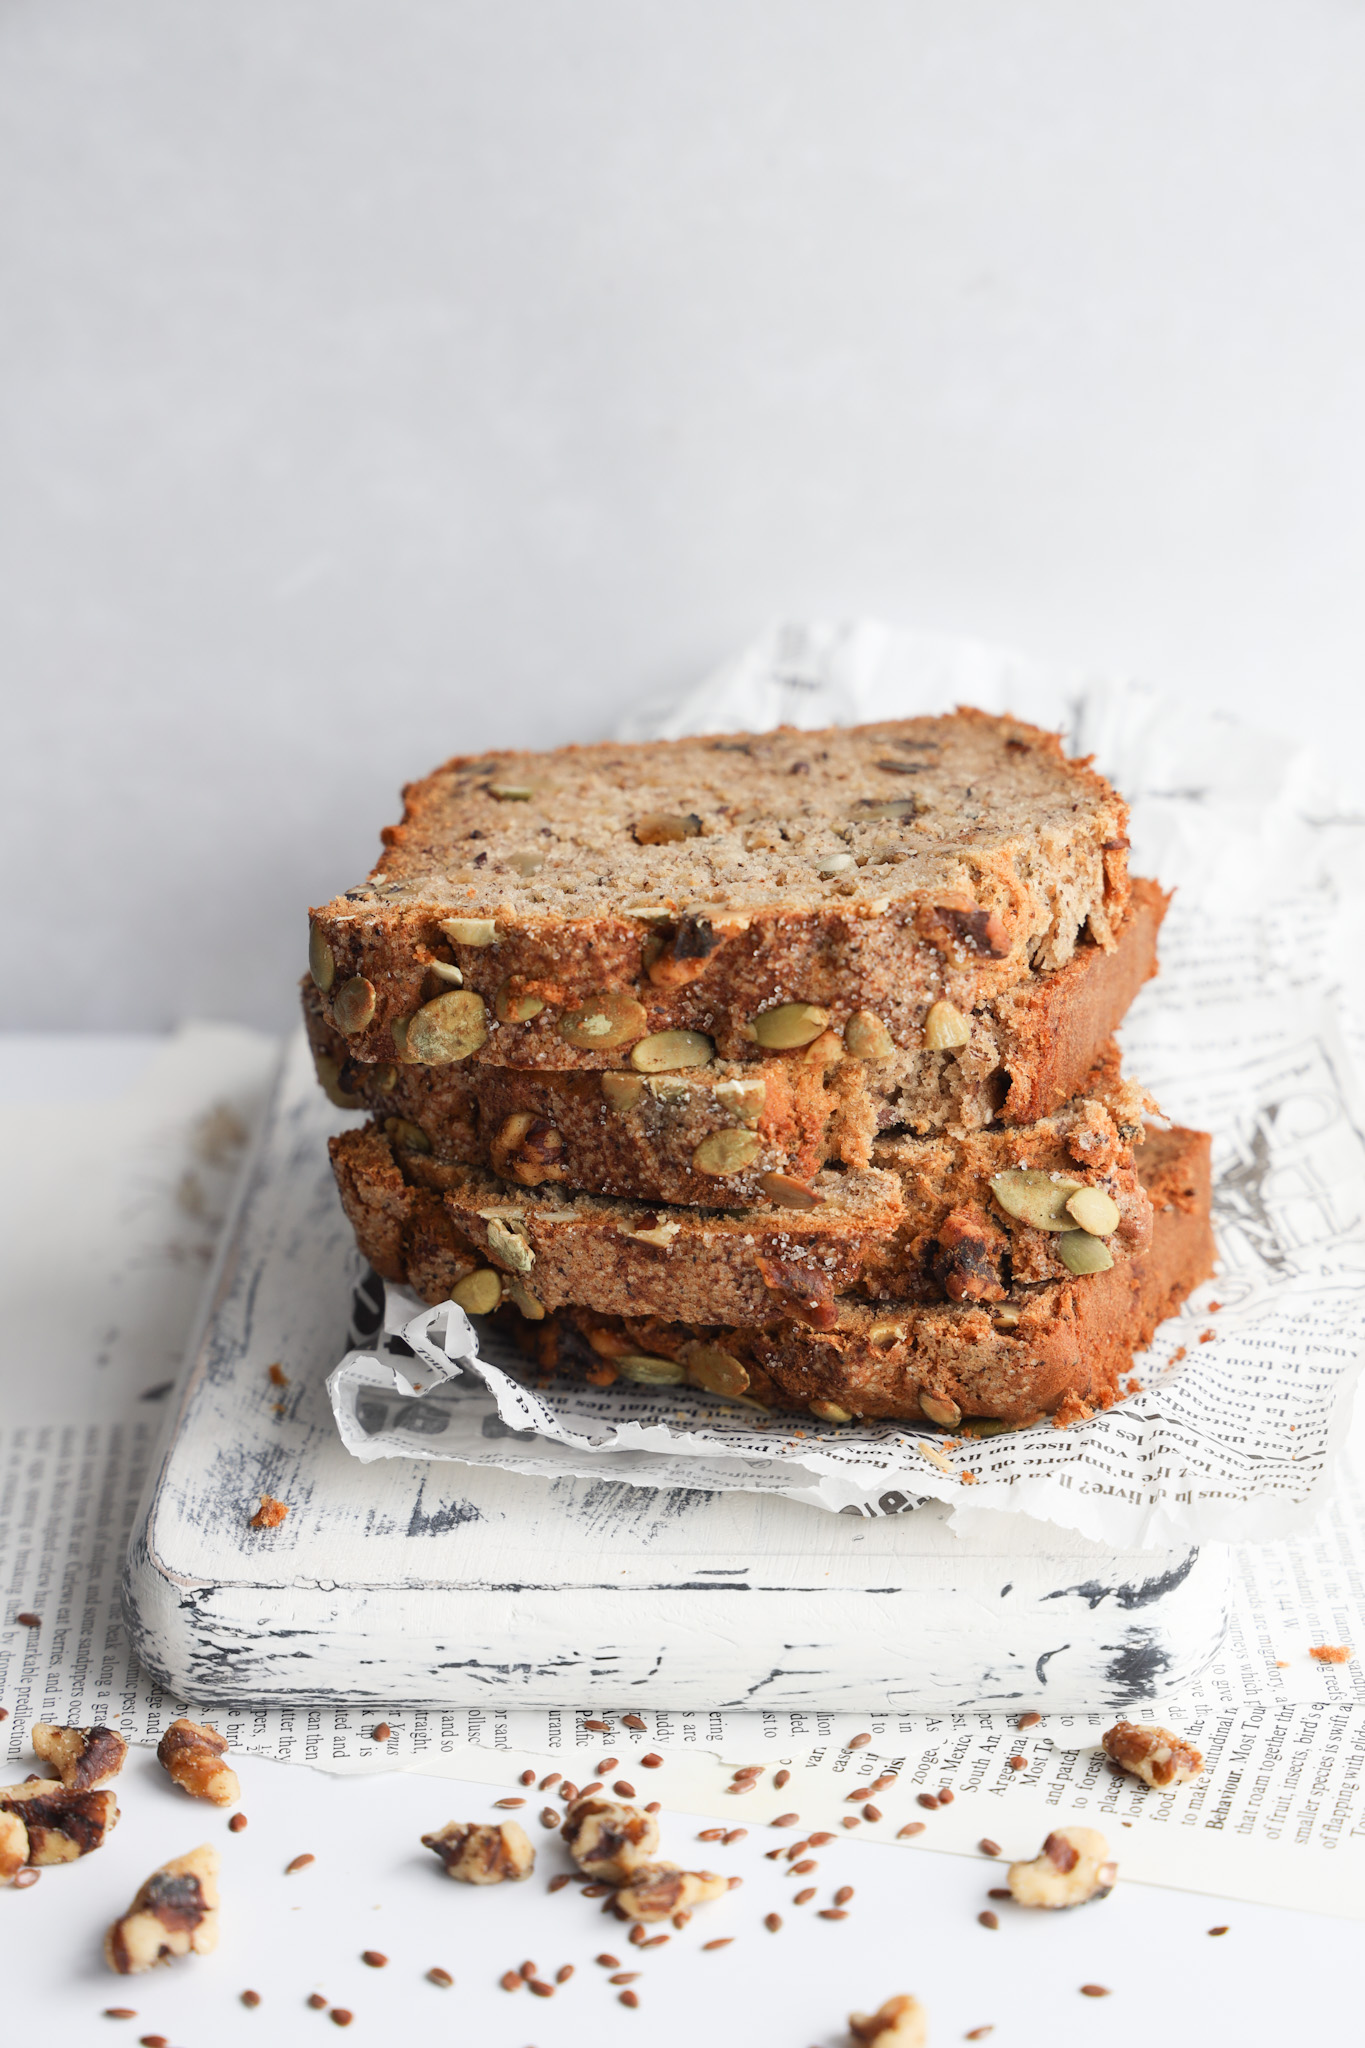 A gluten and dairy-free banana bread that is super moist.